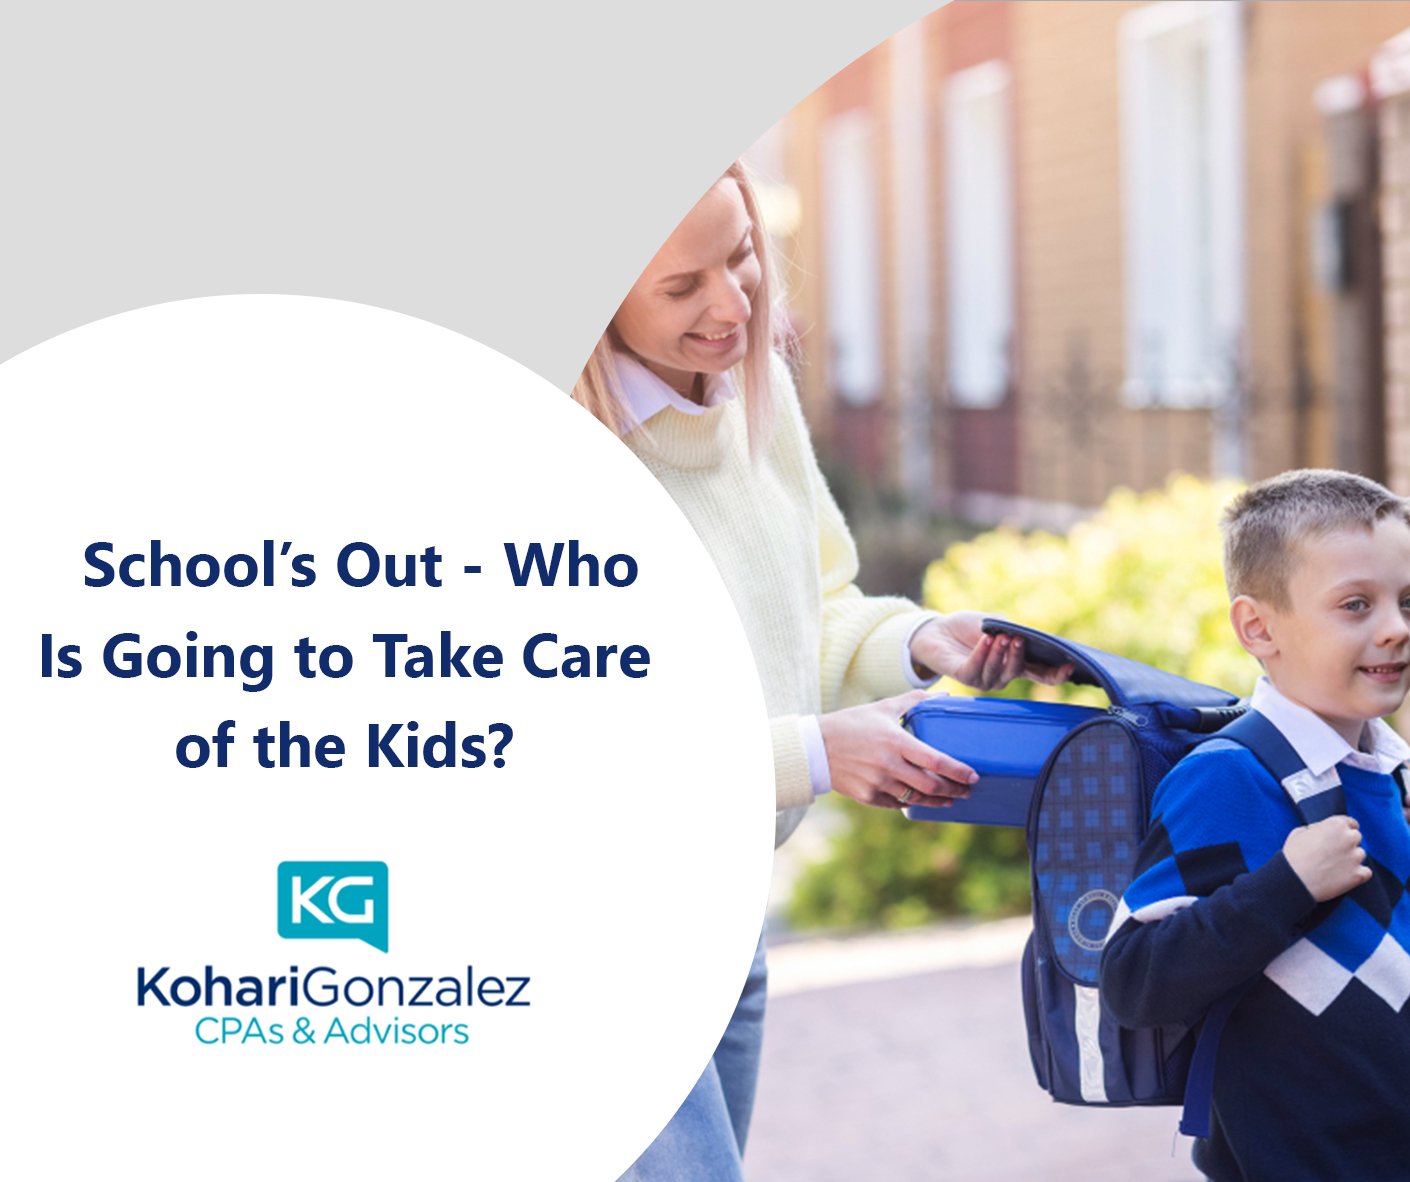 School’s Out - Who Is Going to Take Care of the Kids